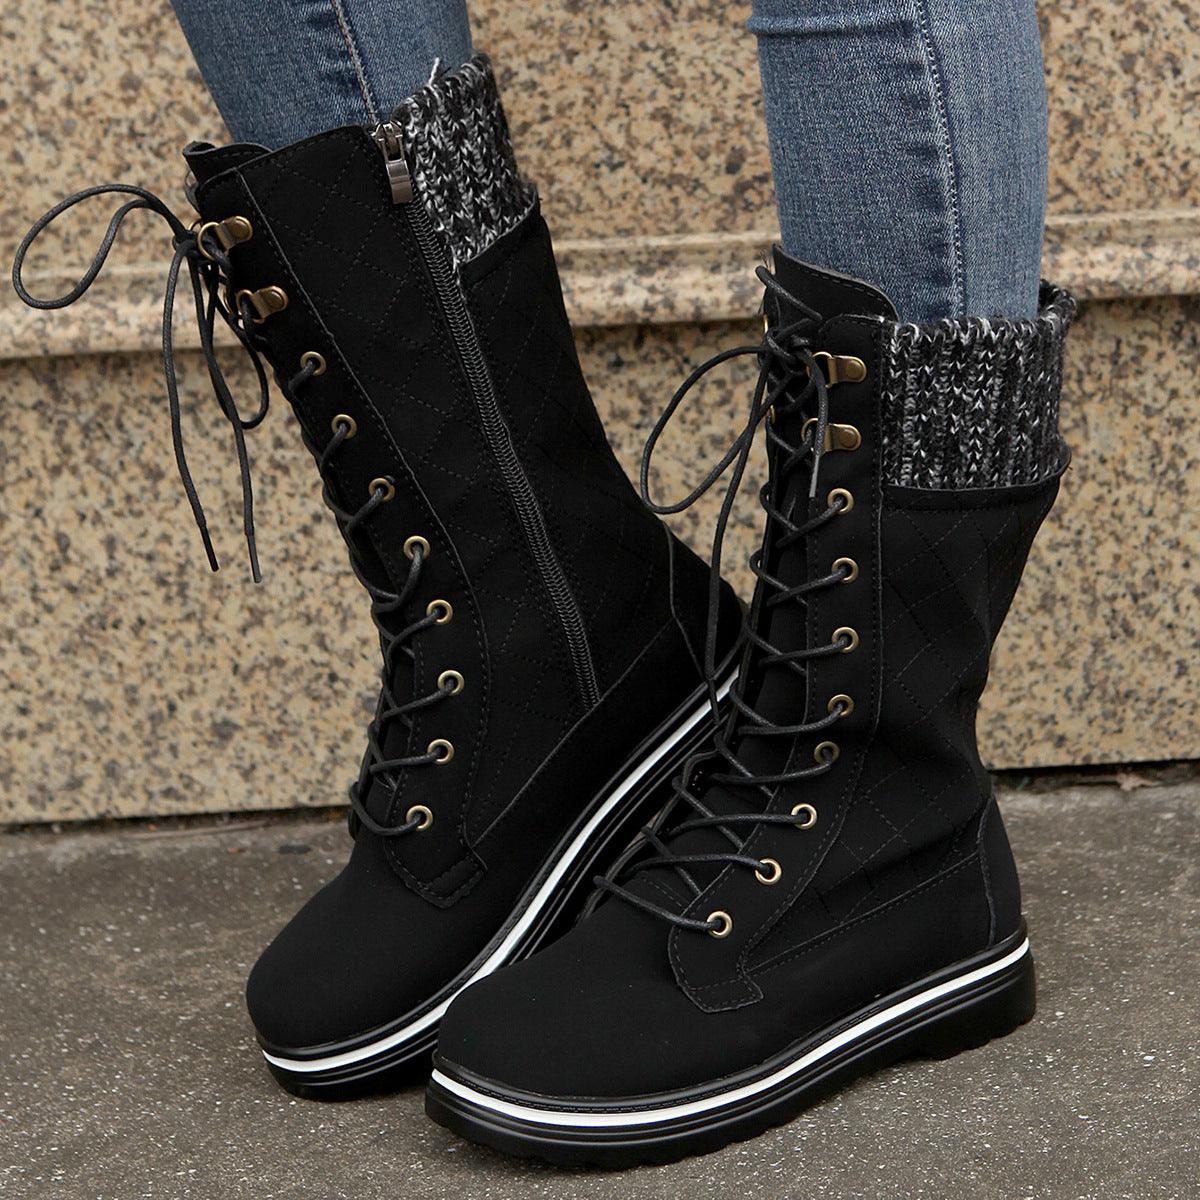 ARIANA - Mid Calf Lace-up Long Boots Women Flat Heels Round Toe Denim Cowboy Boots With Side Zipper Western Boots Fashion Autumn Winter Shoes - Glinyt